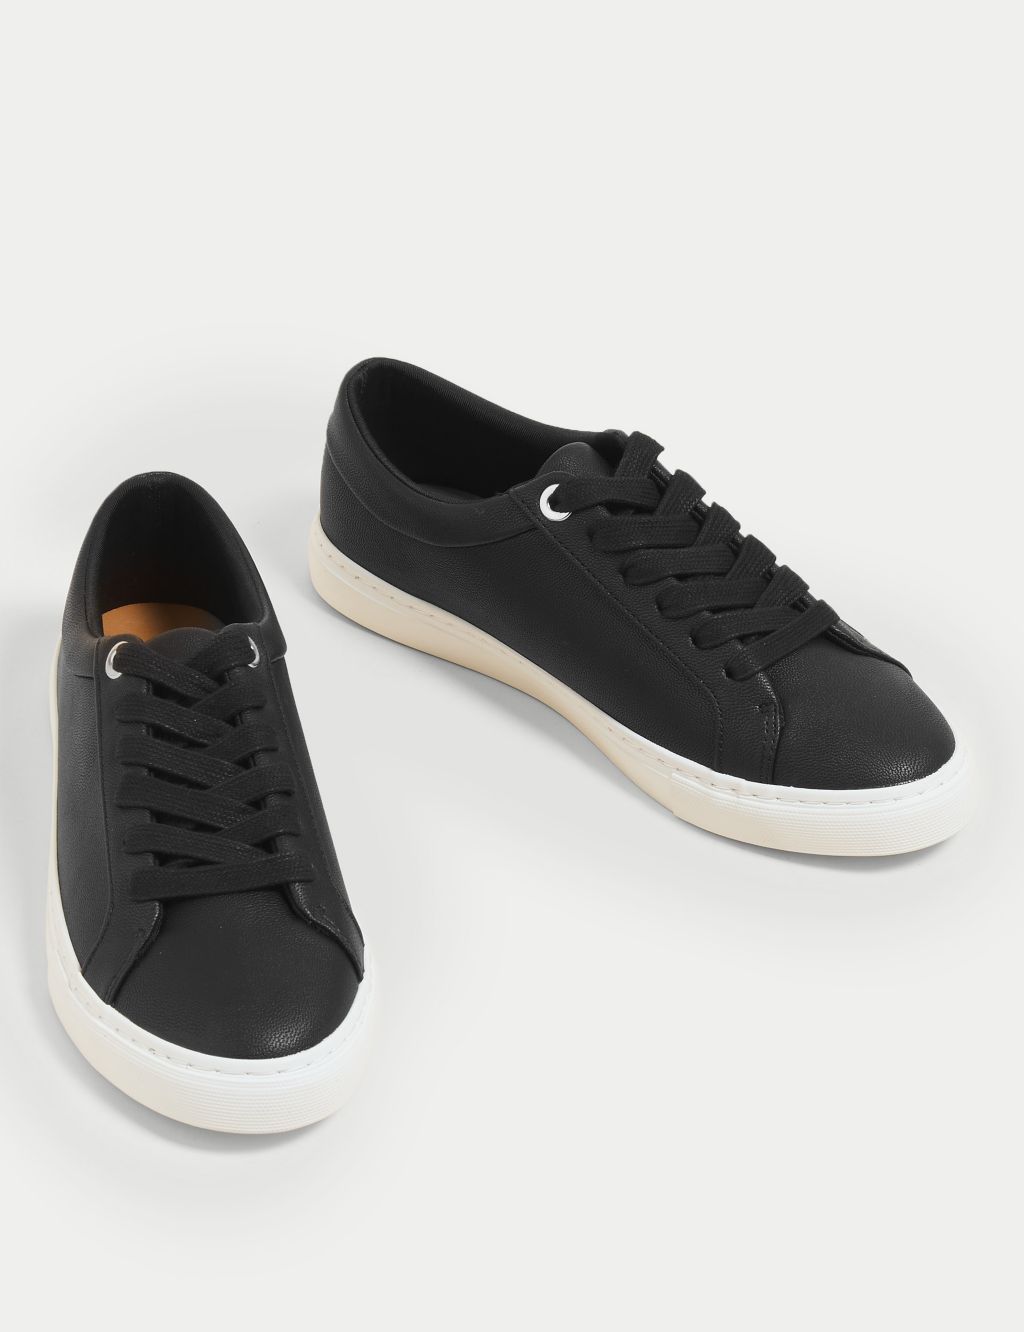 Lace Up Eyelet Detail Trainers image 1